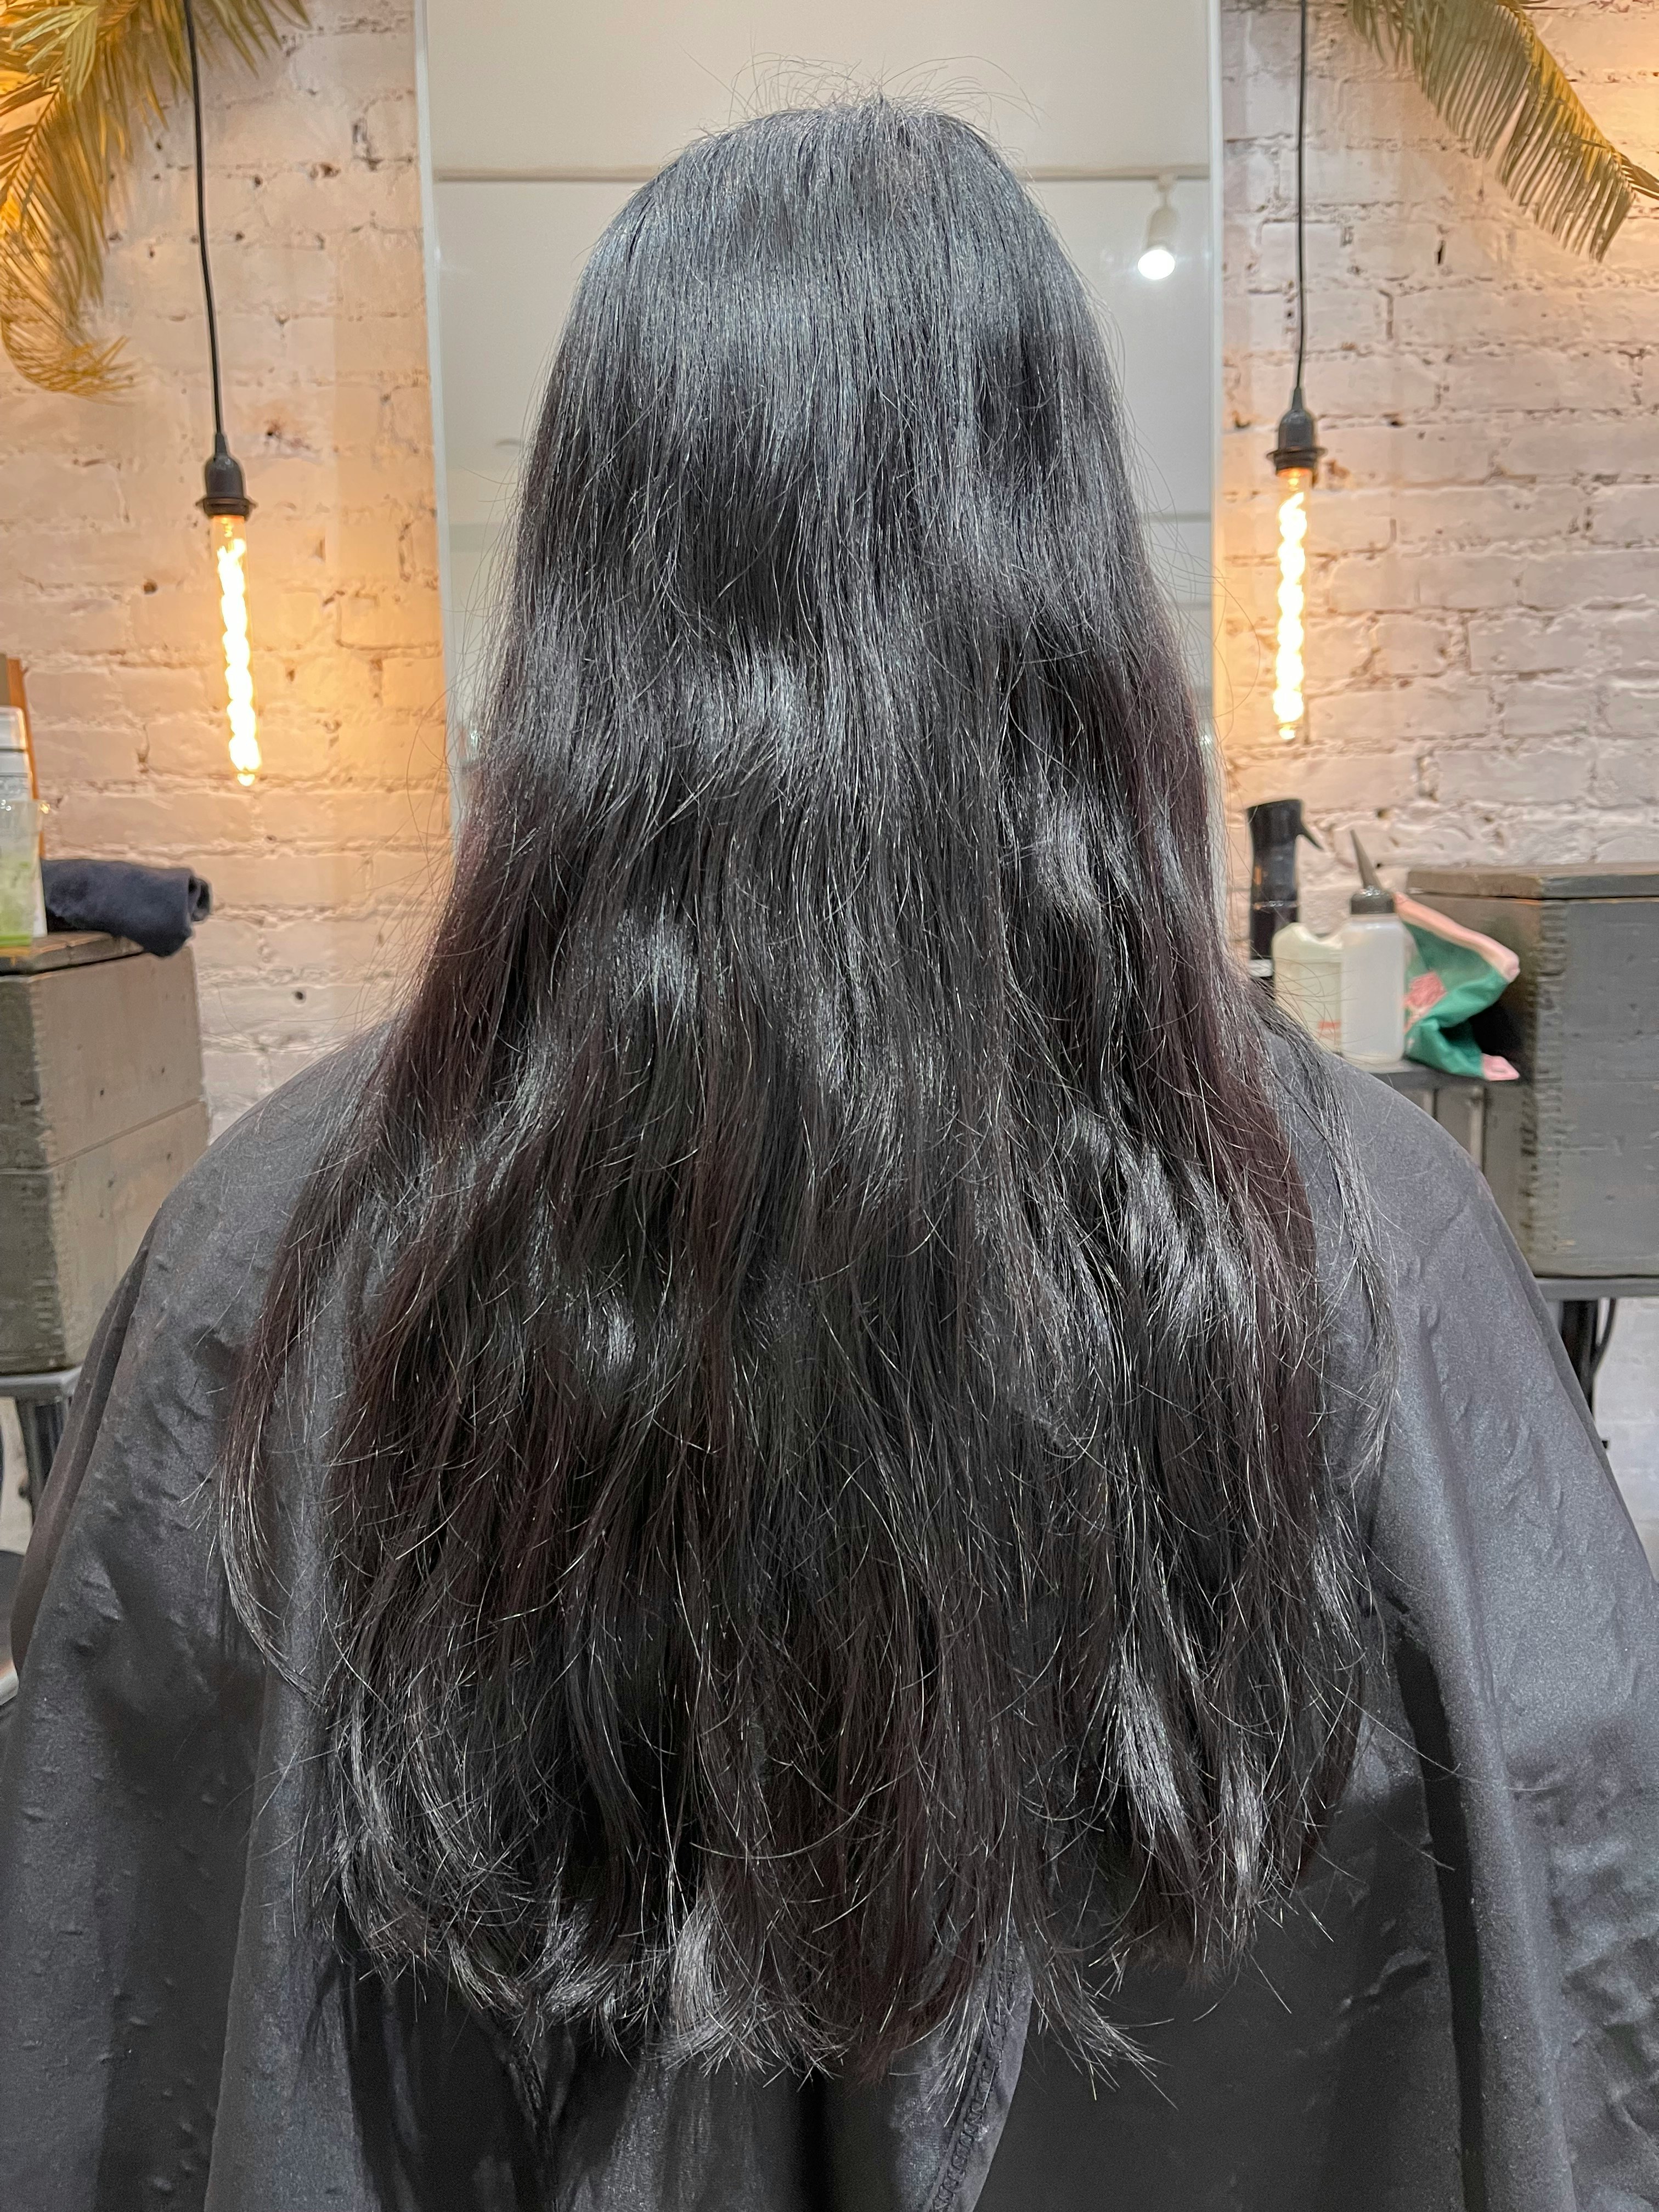 Hair Speak Family Salon  A permanent wave commonly called a perm or  permanent is a hairstyle consisting of waves or curls set into the hair   This is one of our